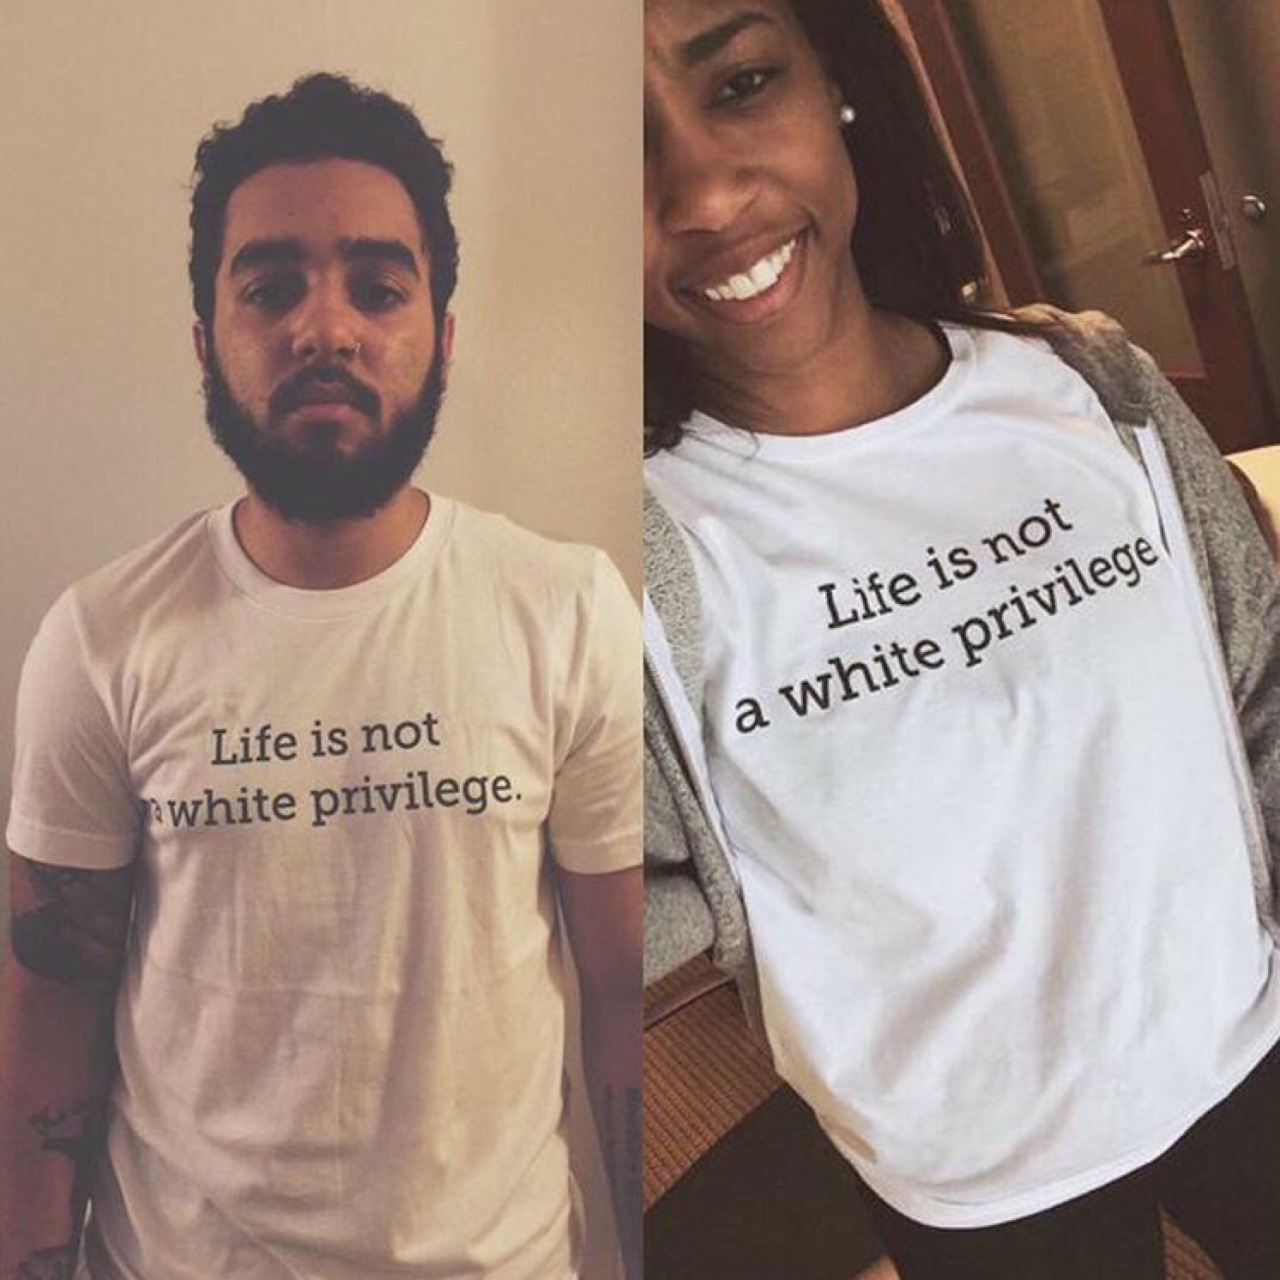 black-culture:  http://teespring.com/life-is-not-a-white-privilege  Life is not a